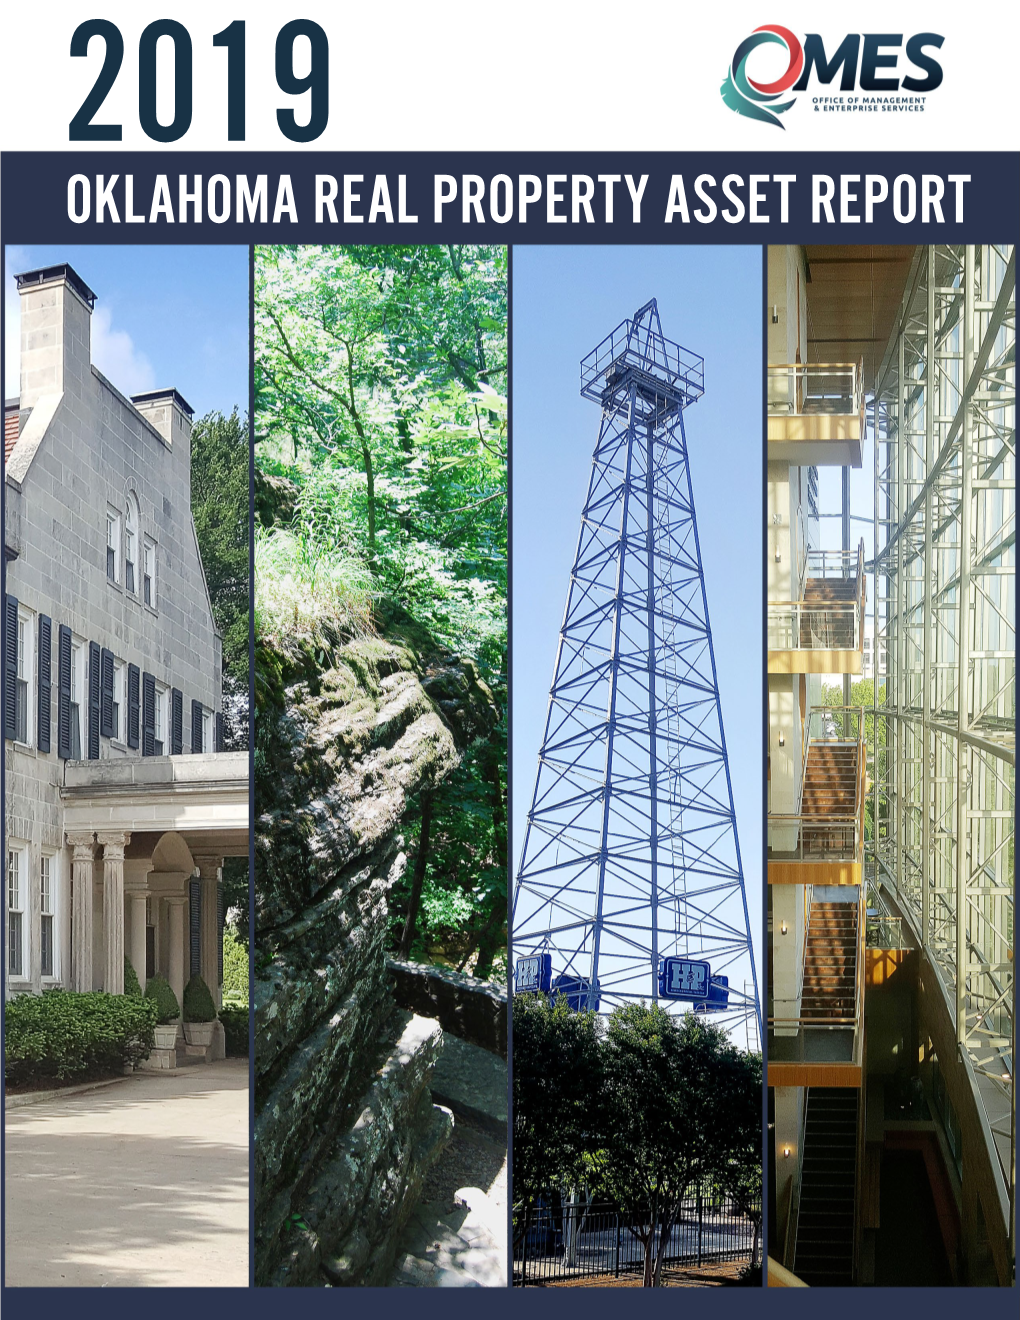 OKLAHOMA REAL PROPERTY ASSET REPORT Contents